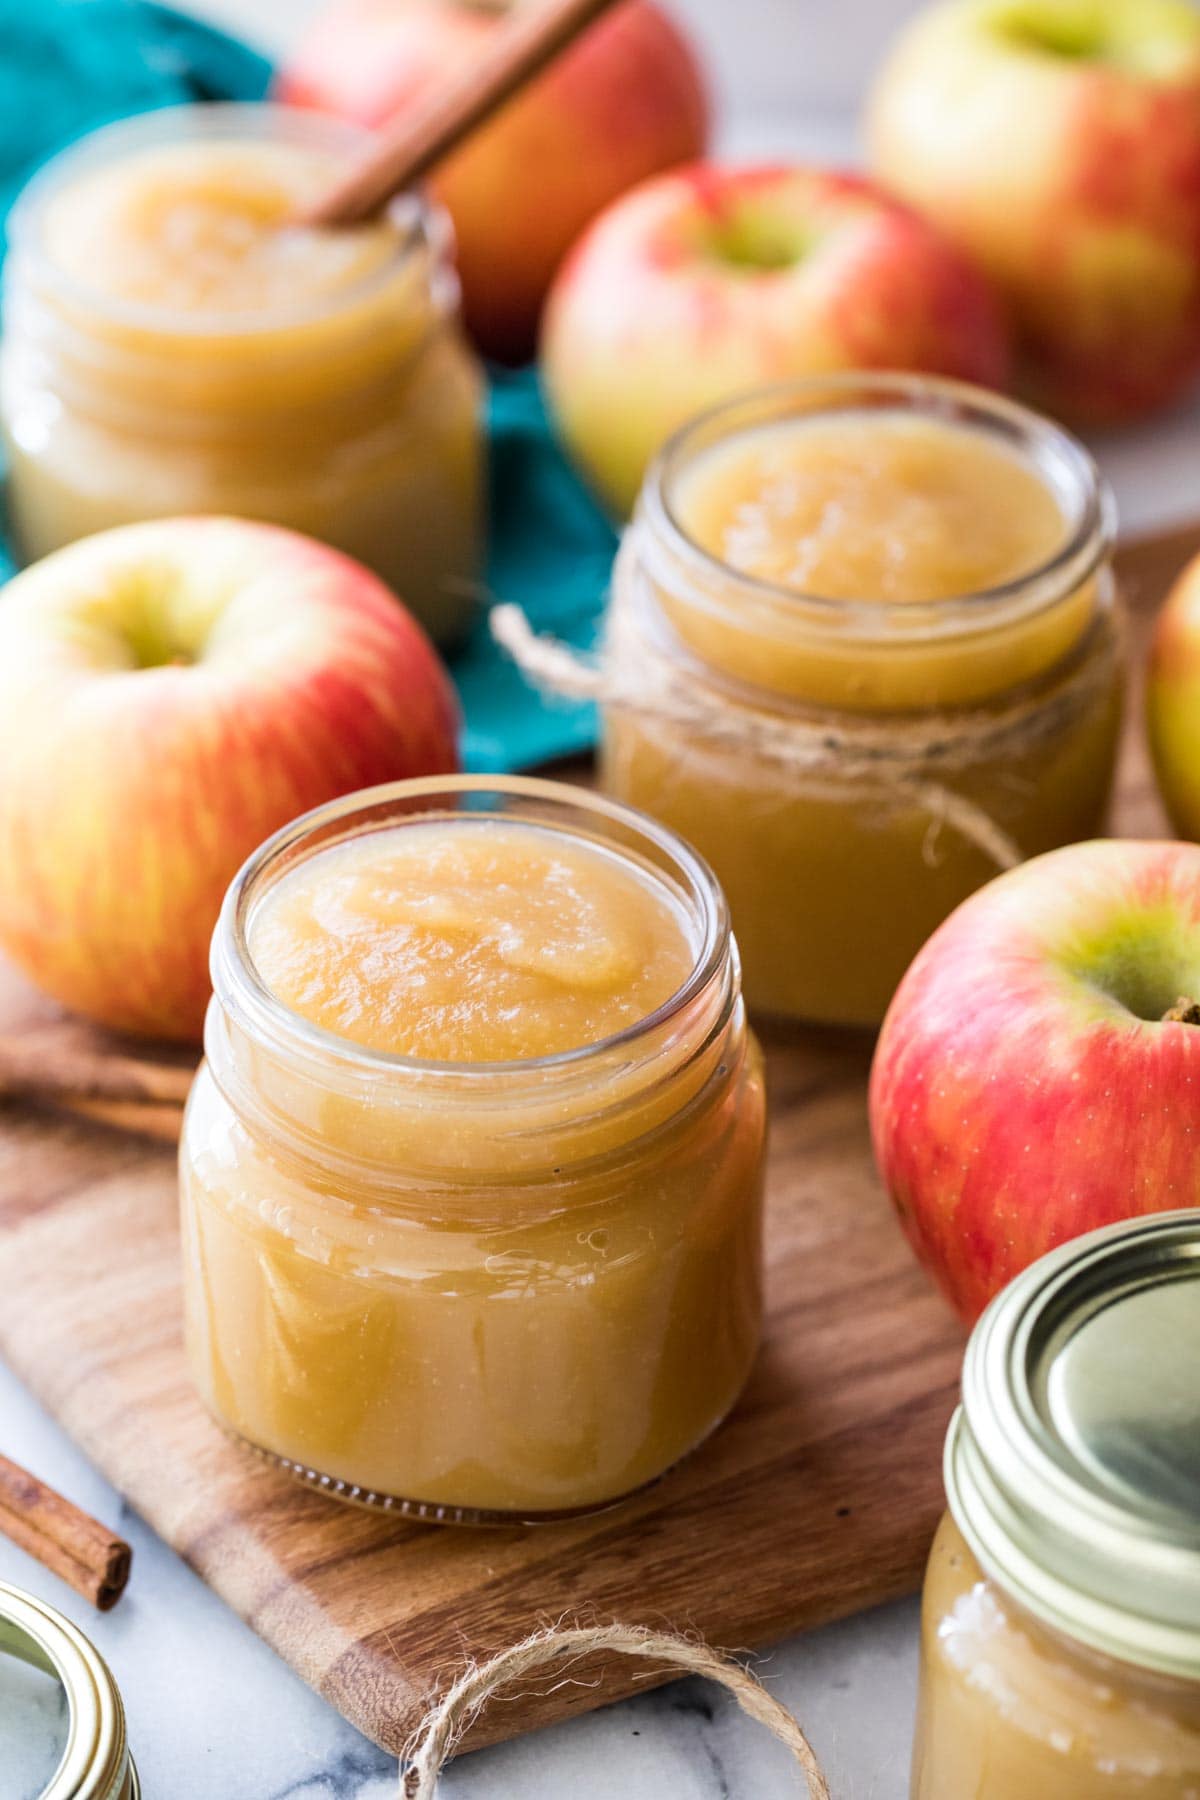 Several glass jars of homemade applesauce surrounded by red honeycrisp apples